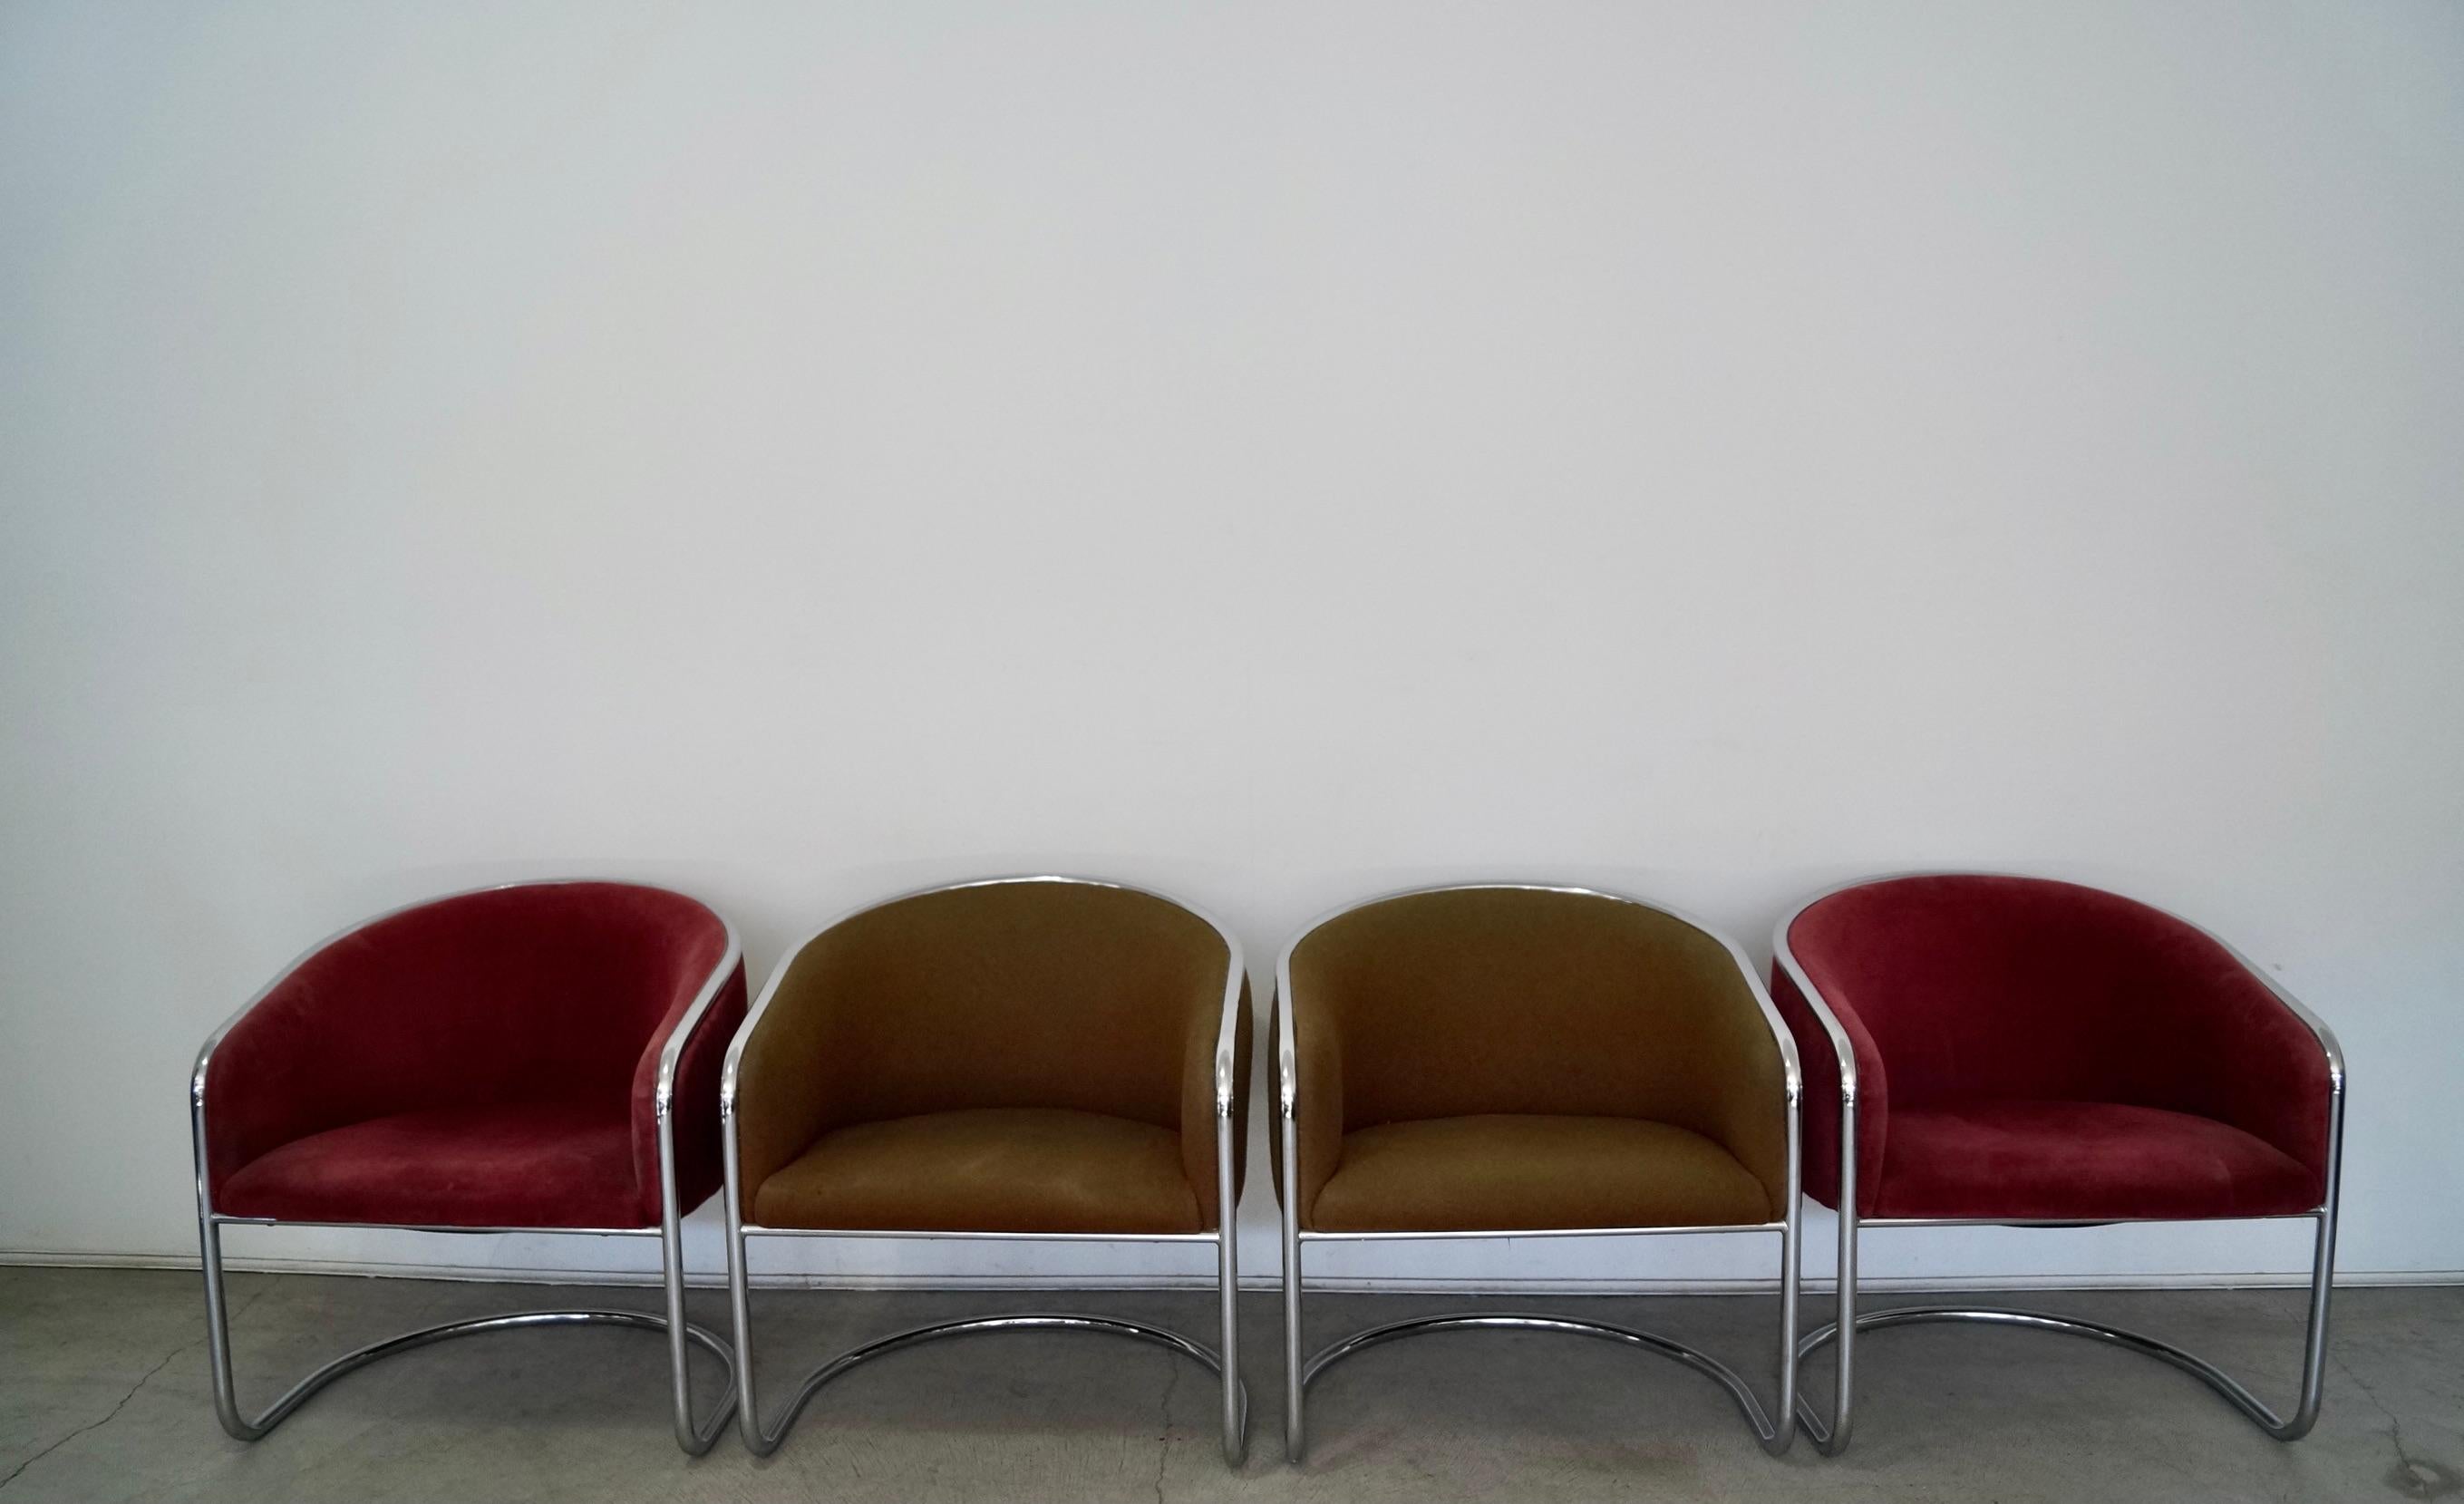 Vintage Mid-century Modern lounge chairs for sale. They are original Thonet chairs designed by Anton Lorenz, and have the original upholstery. The chrome frames have been polished, and can be reupholstered in a new fresh fabric of choice. They can